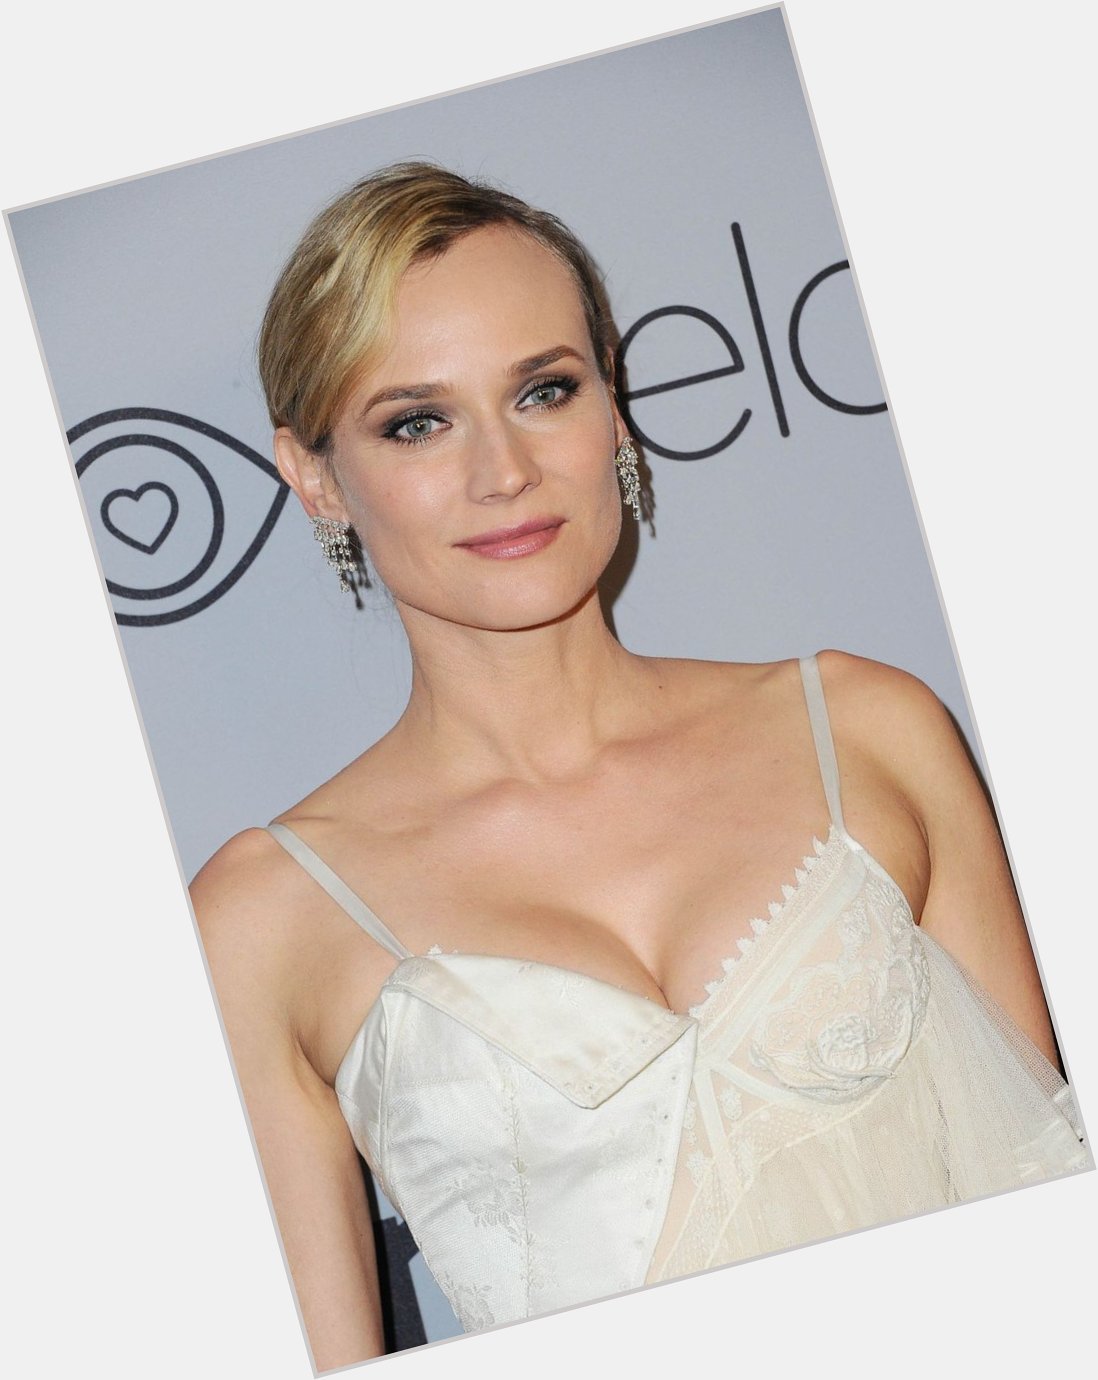 Happy 45th Birthday Shout Out to the lovely Diane Kruger!!! 